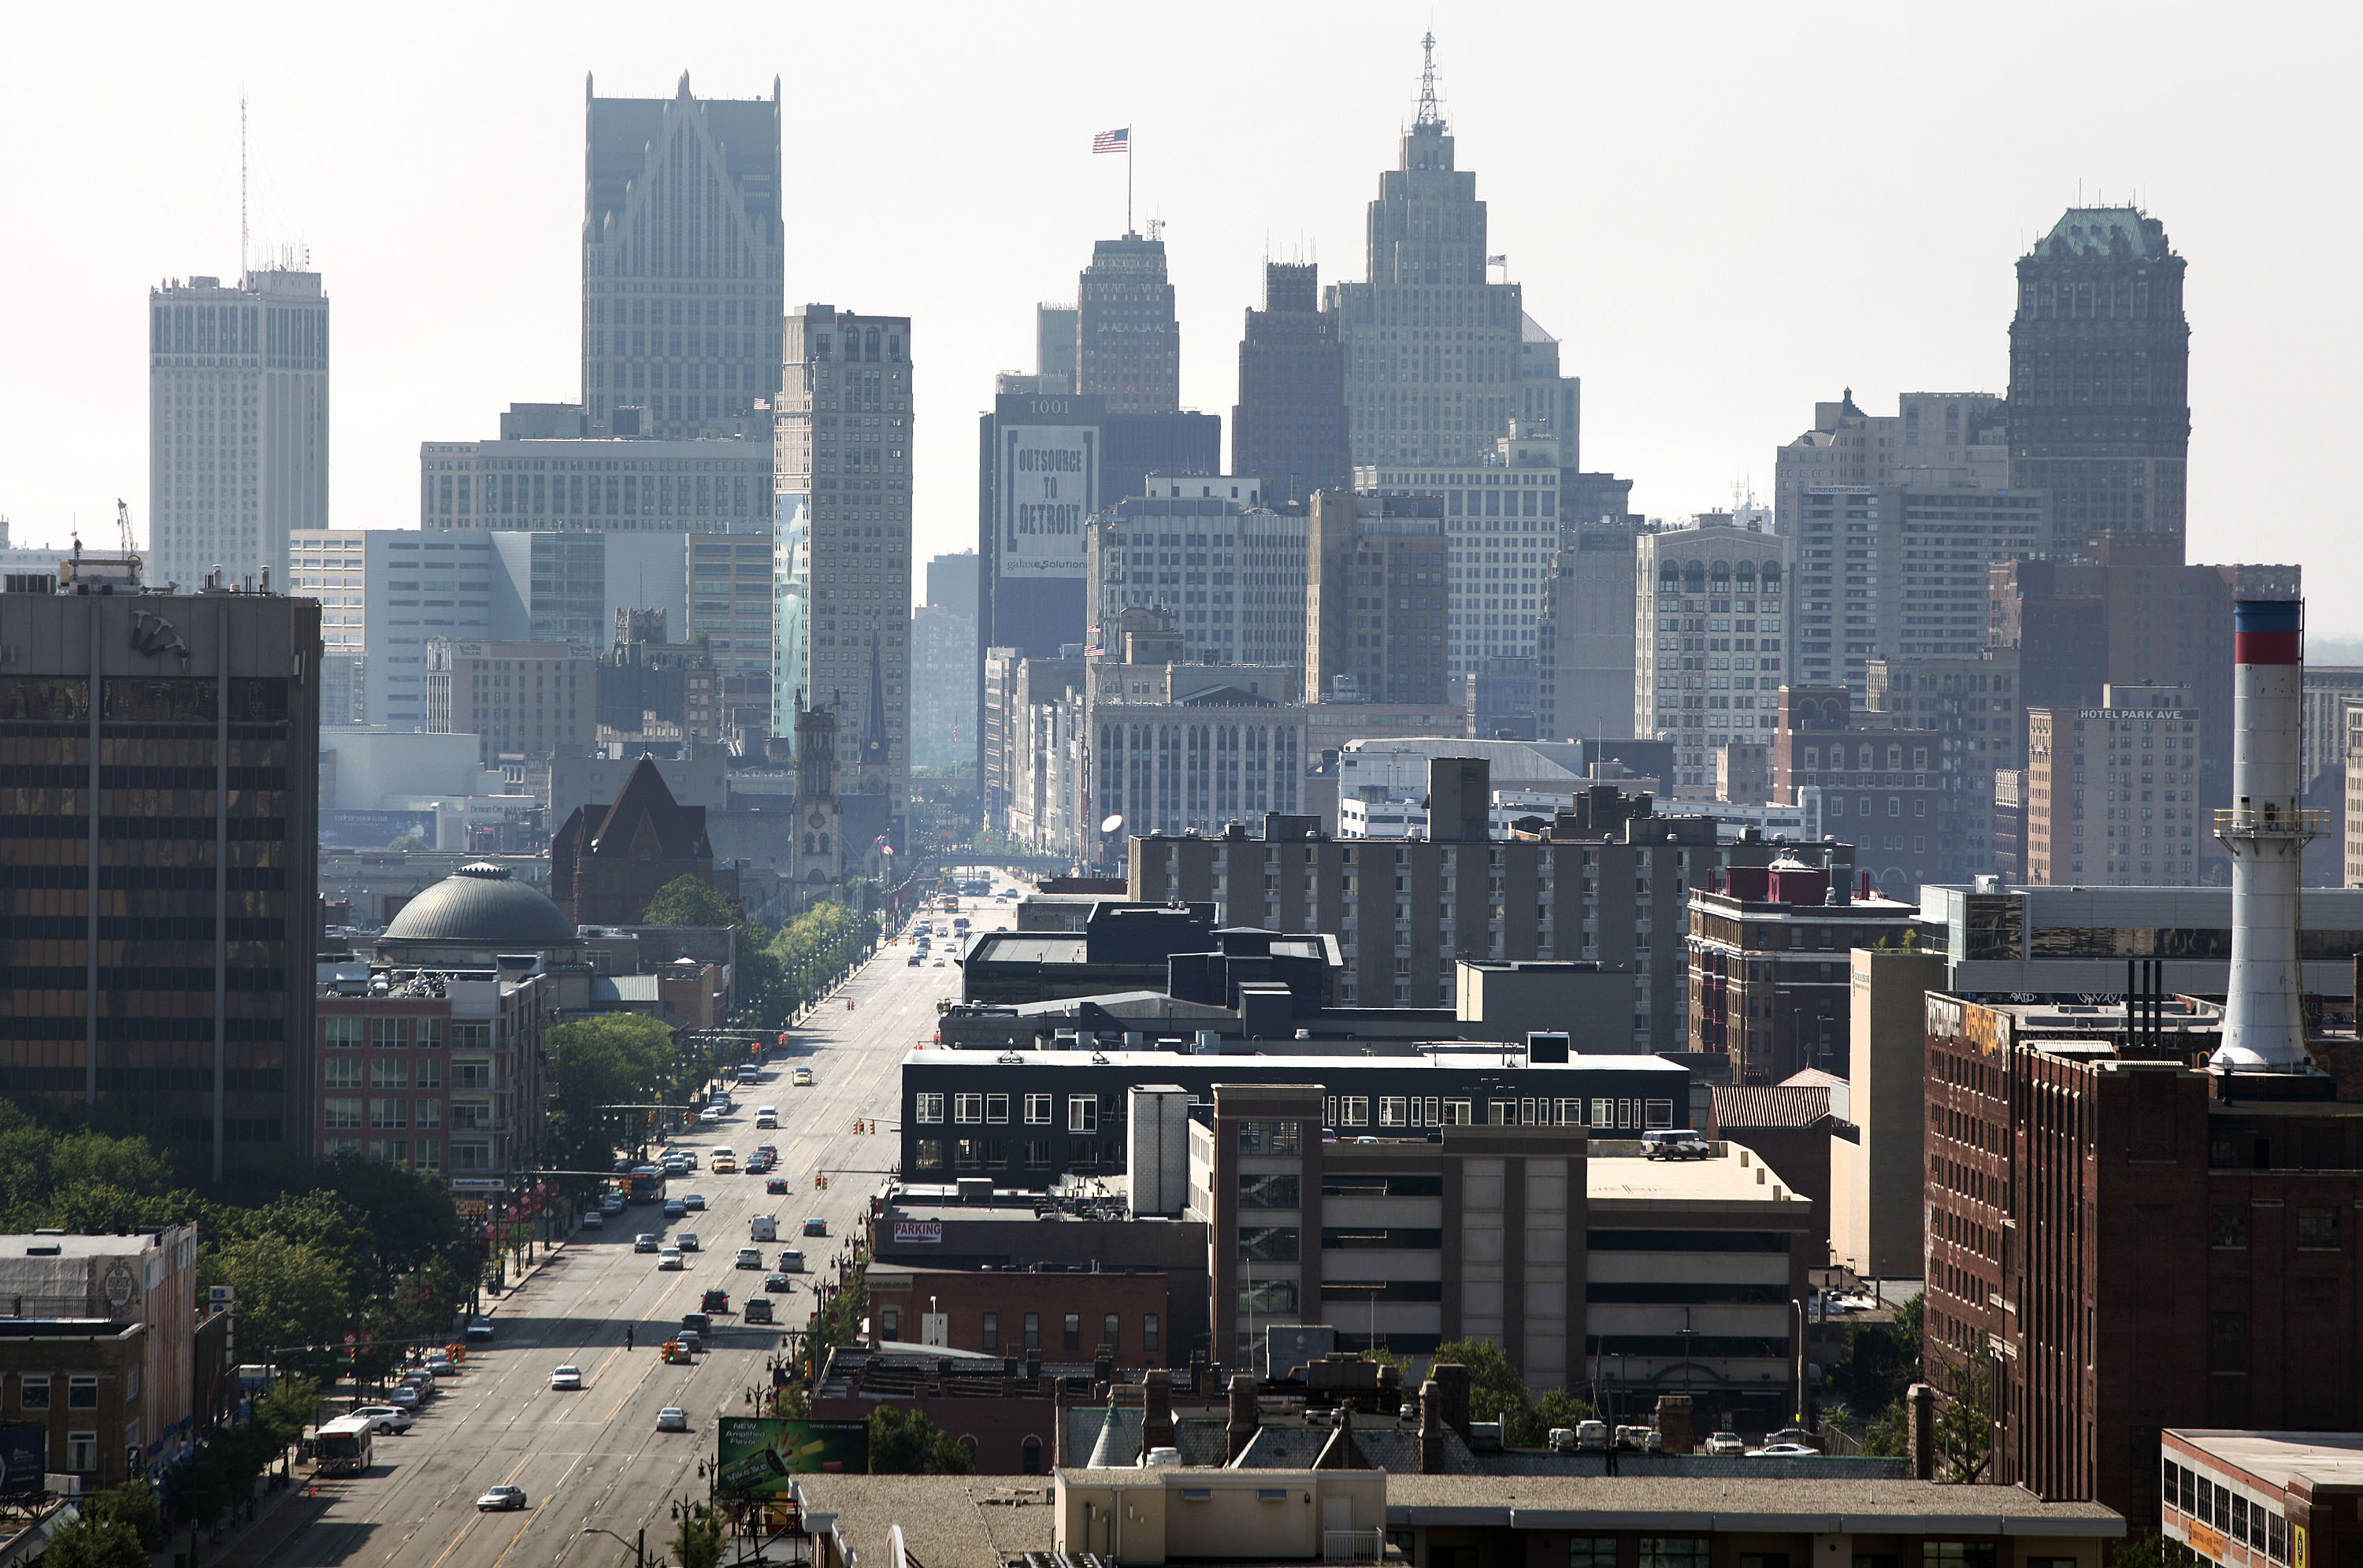 A view of Downtown Detroit on July 19, 2013. (Bill Pugliano—Getty Images)